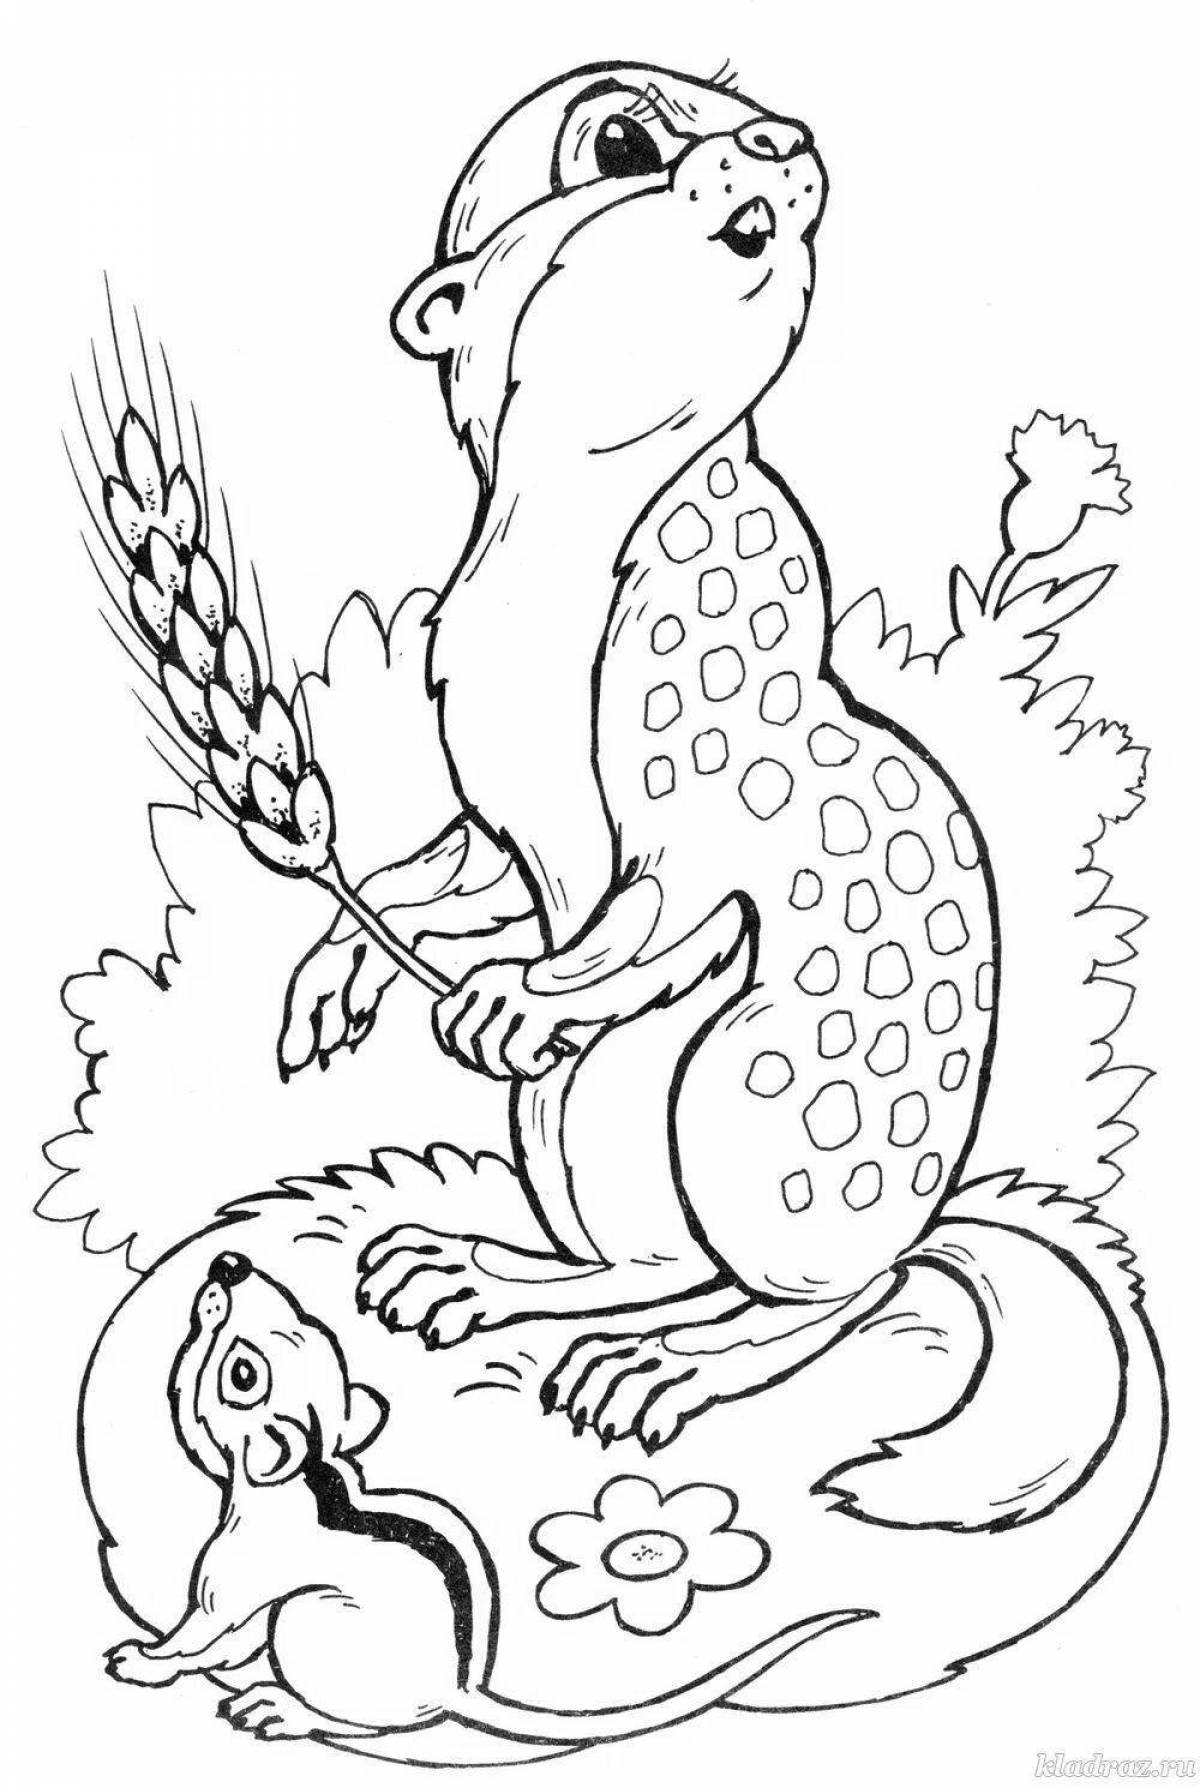 Creative chipmunk coloring book for kids